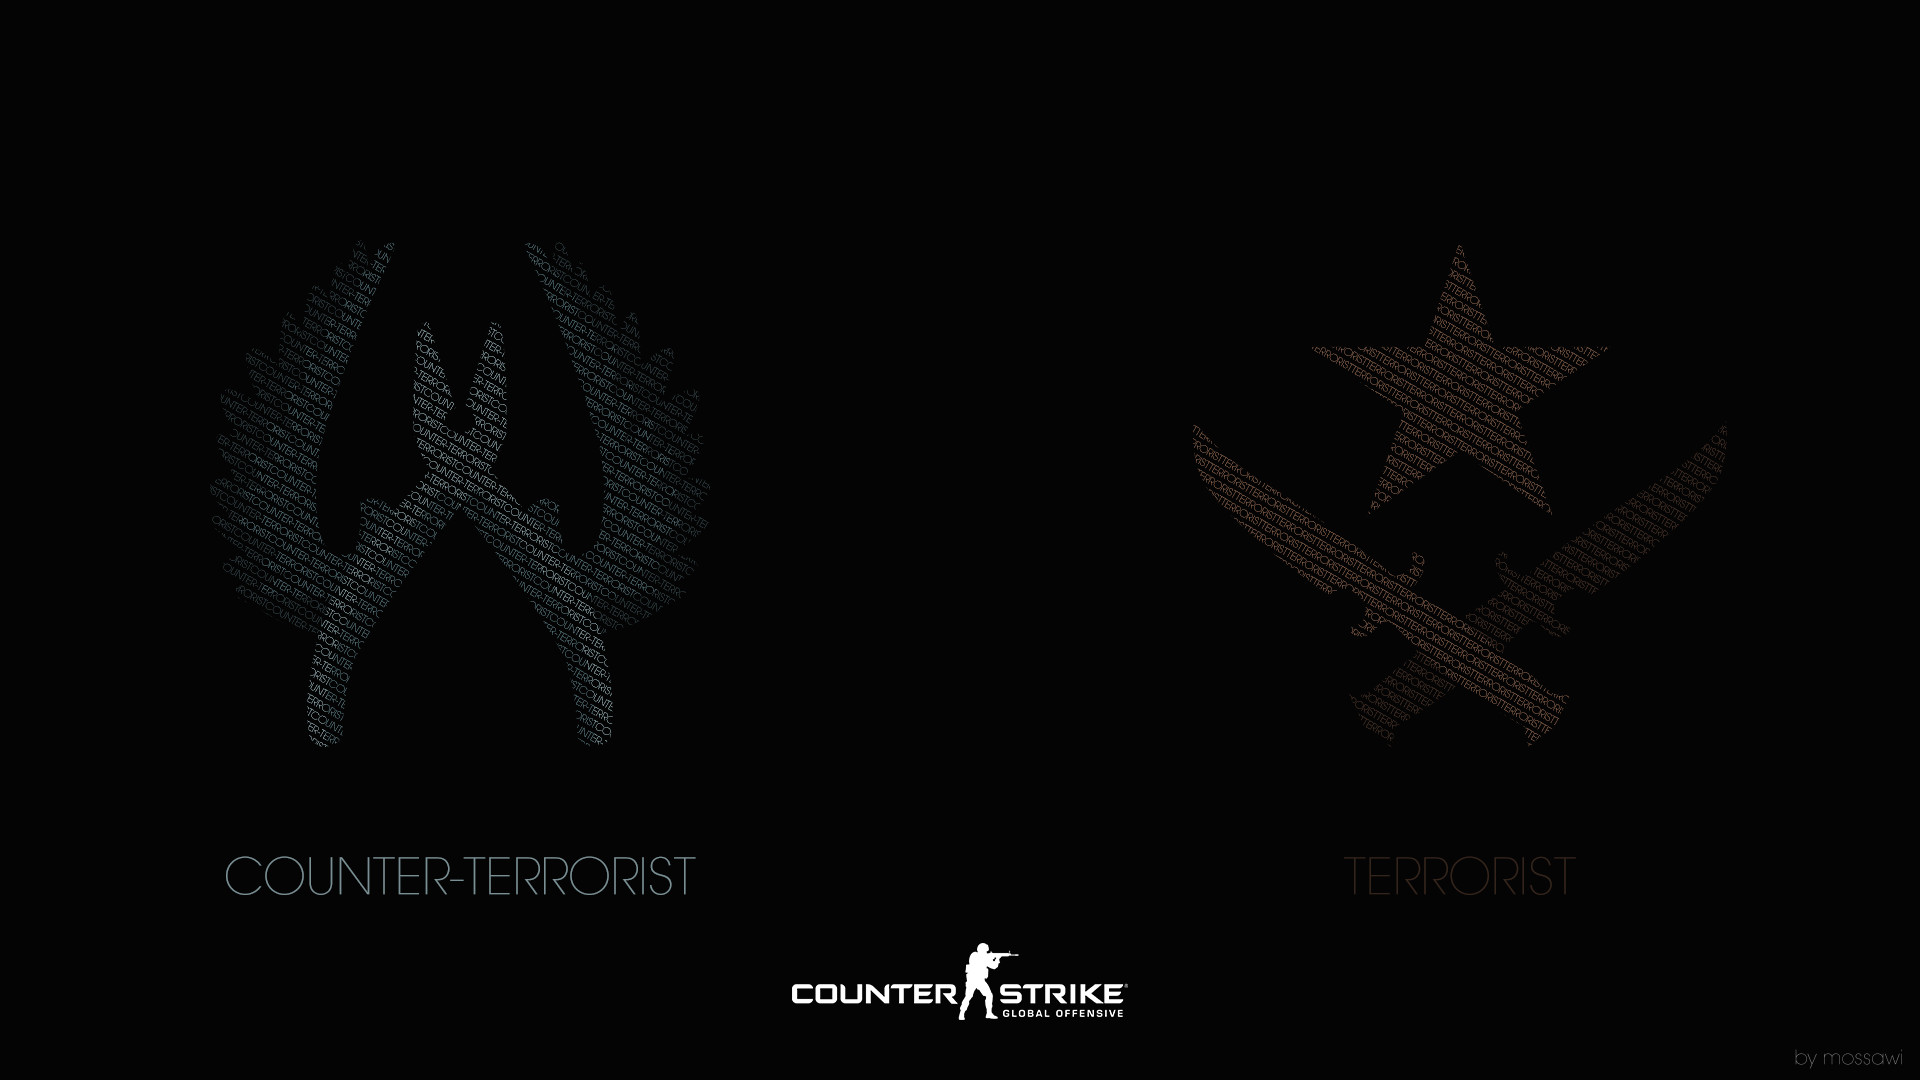 1920x1080 ... http://www.mossawi.nl/csgo/assets/images/original/ct_t_background.png